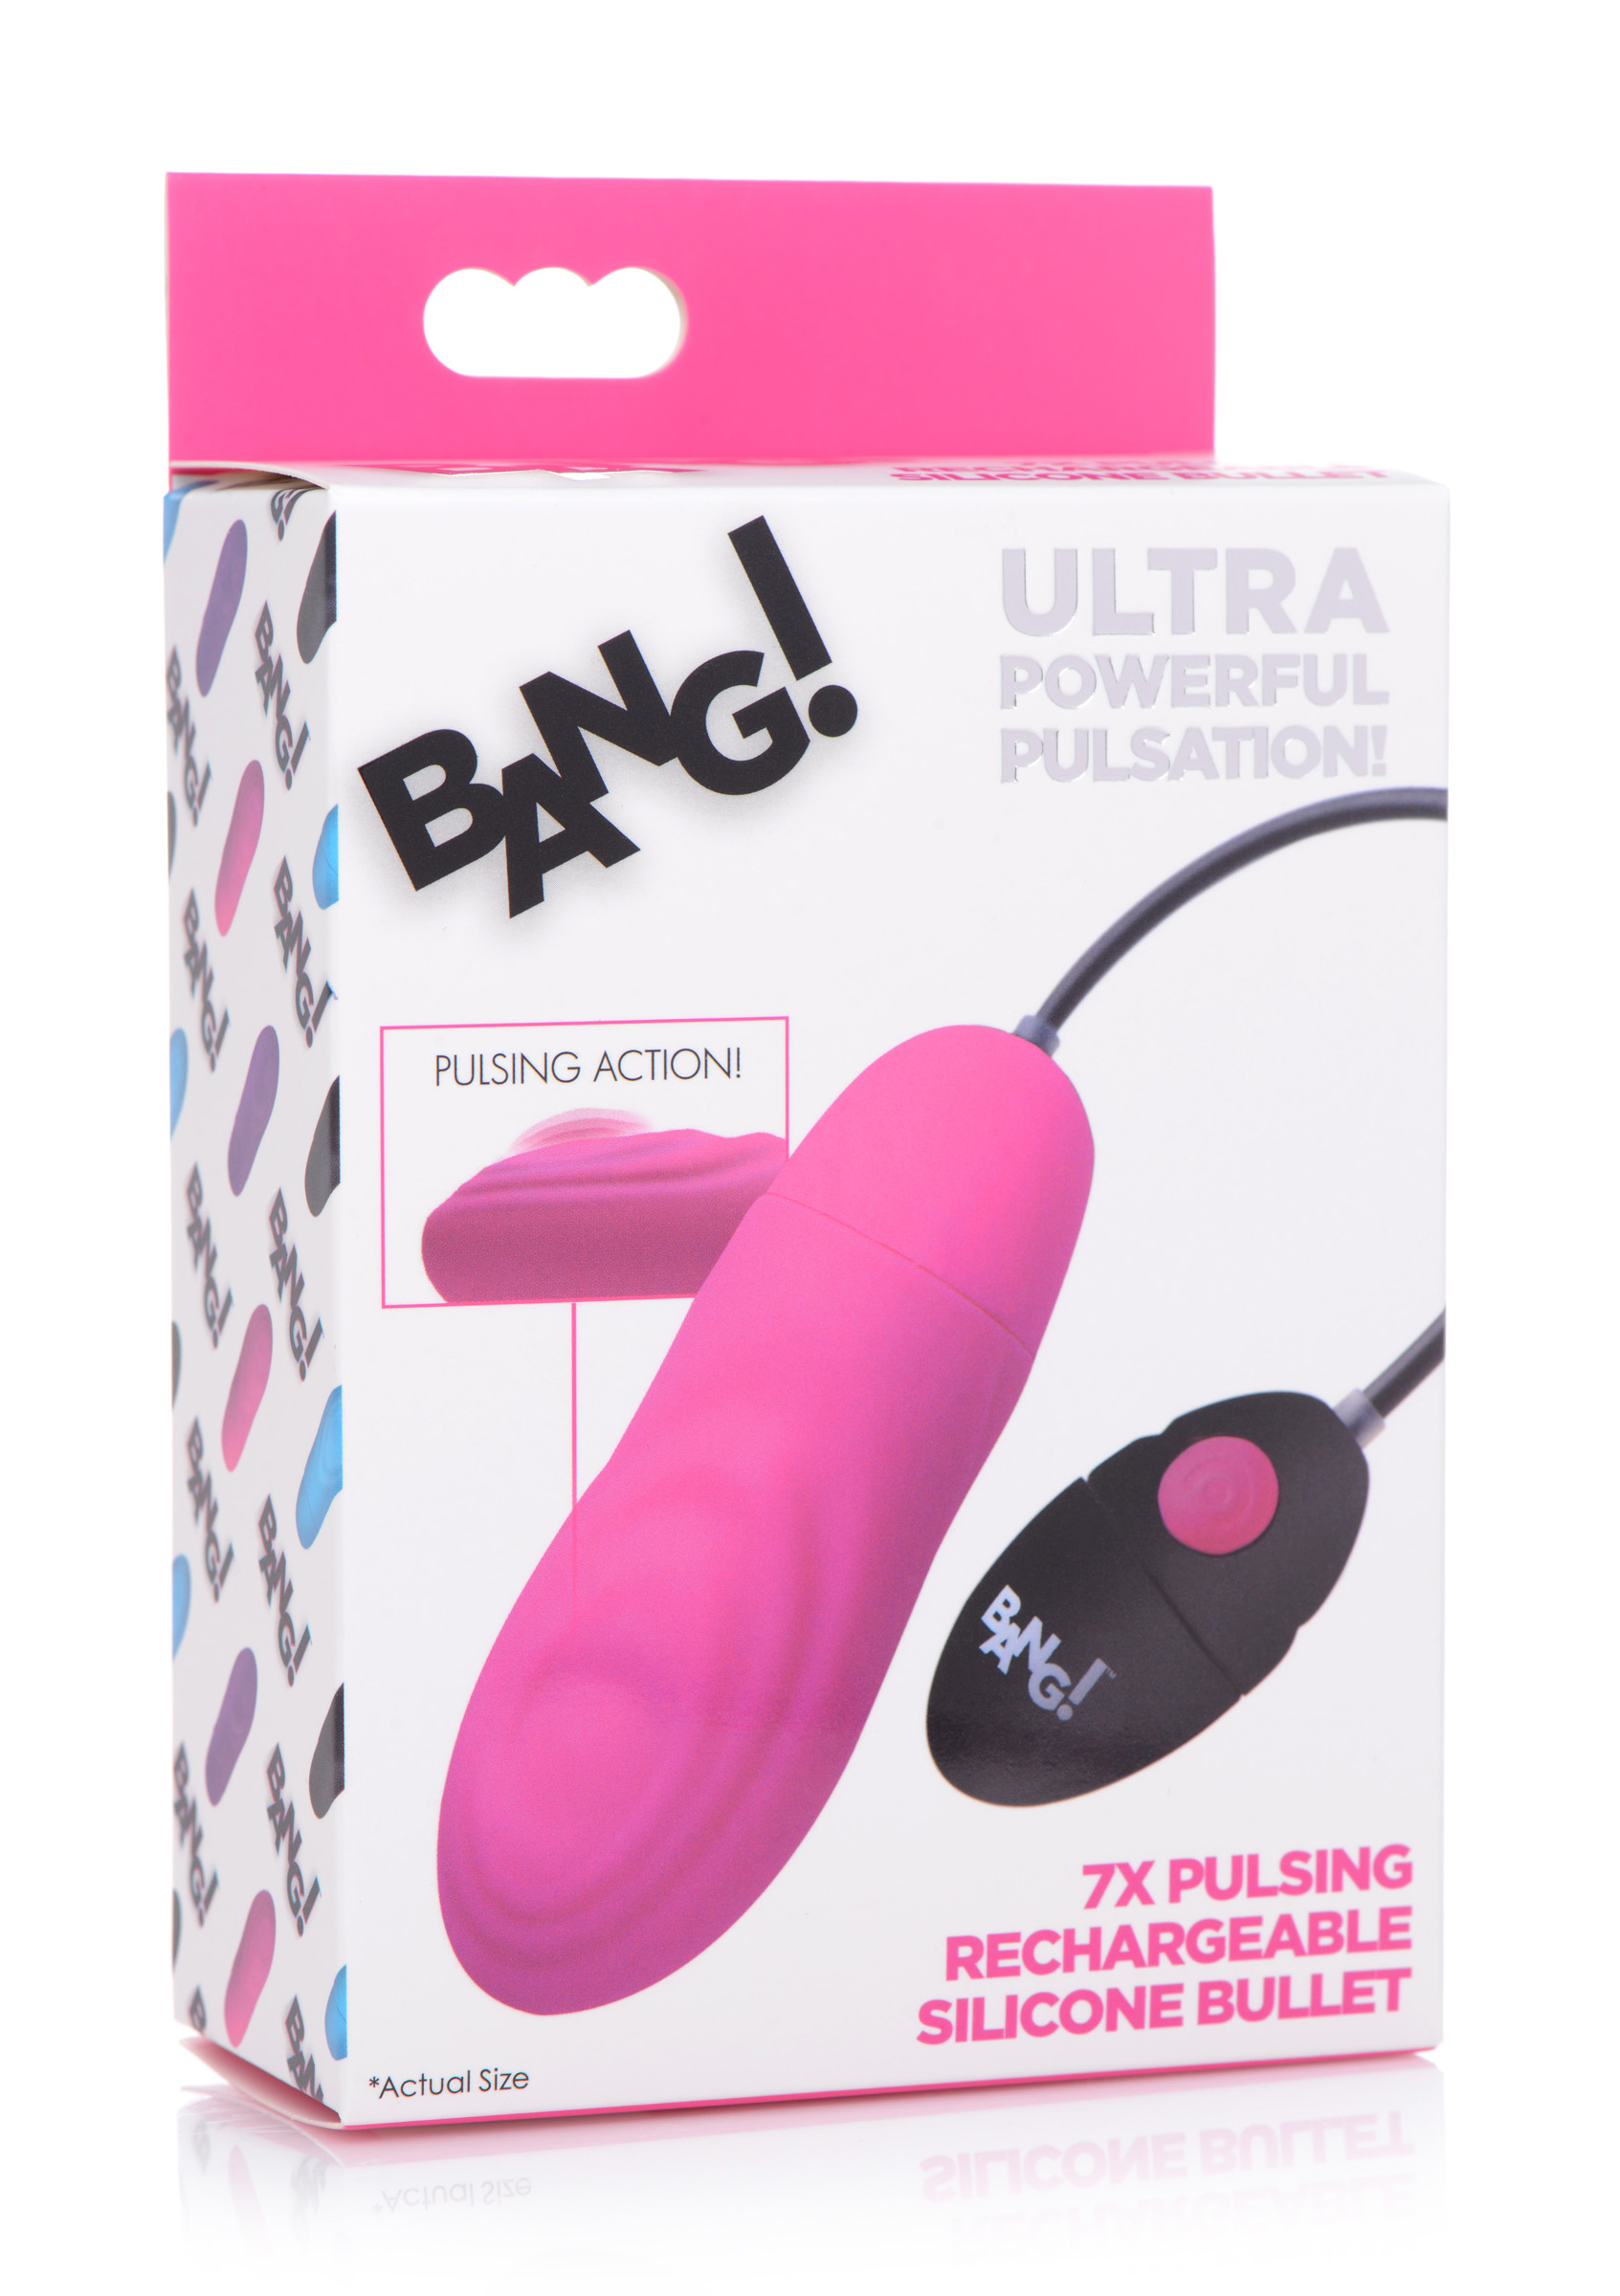 7x Pulsing Rechargeable Silicone Vibrator